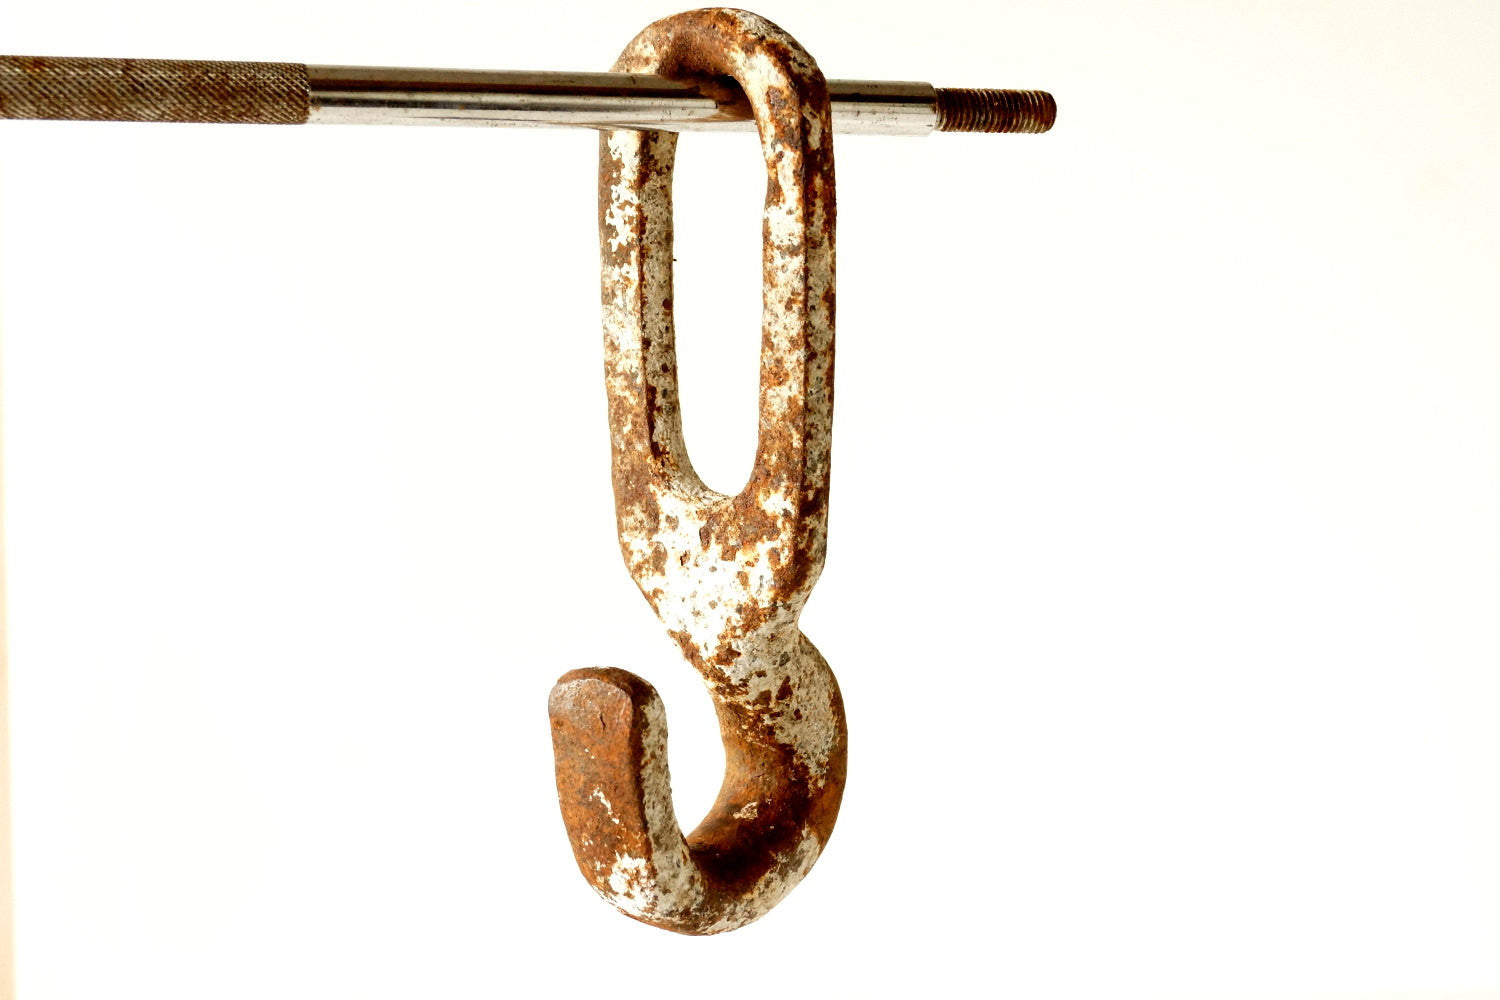 Vintage Industrial Cast Iron Metal Hook / Pully Hook in White and Rust –